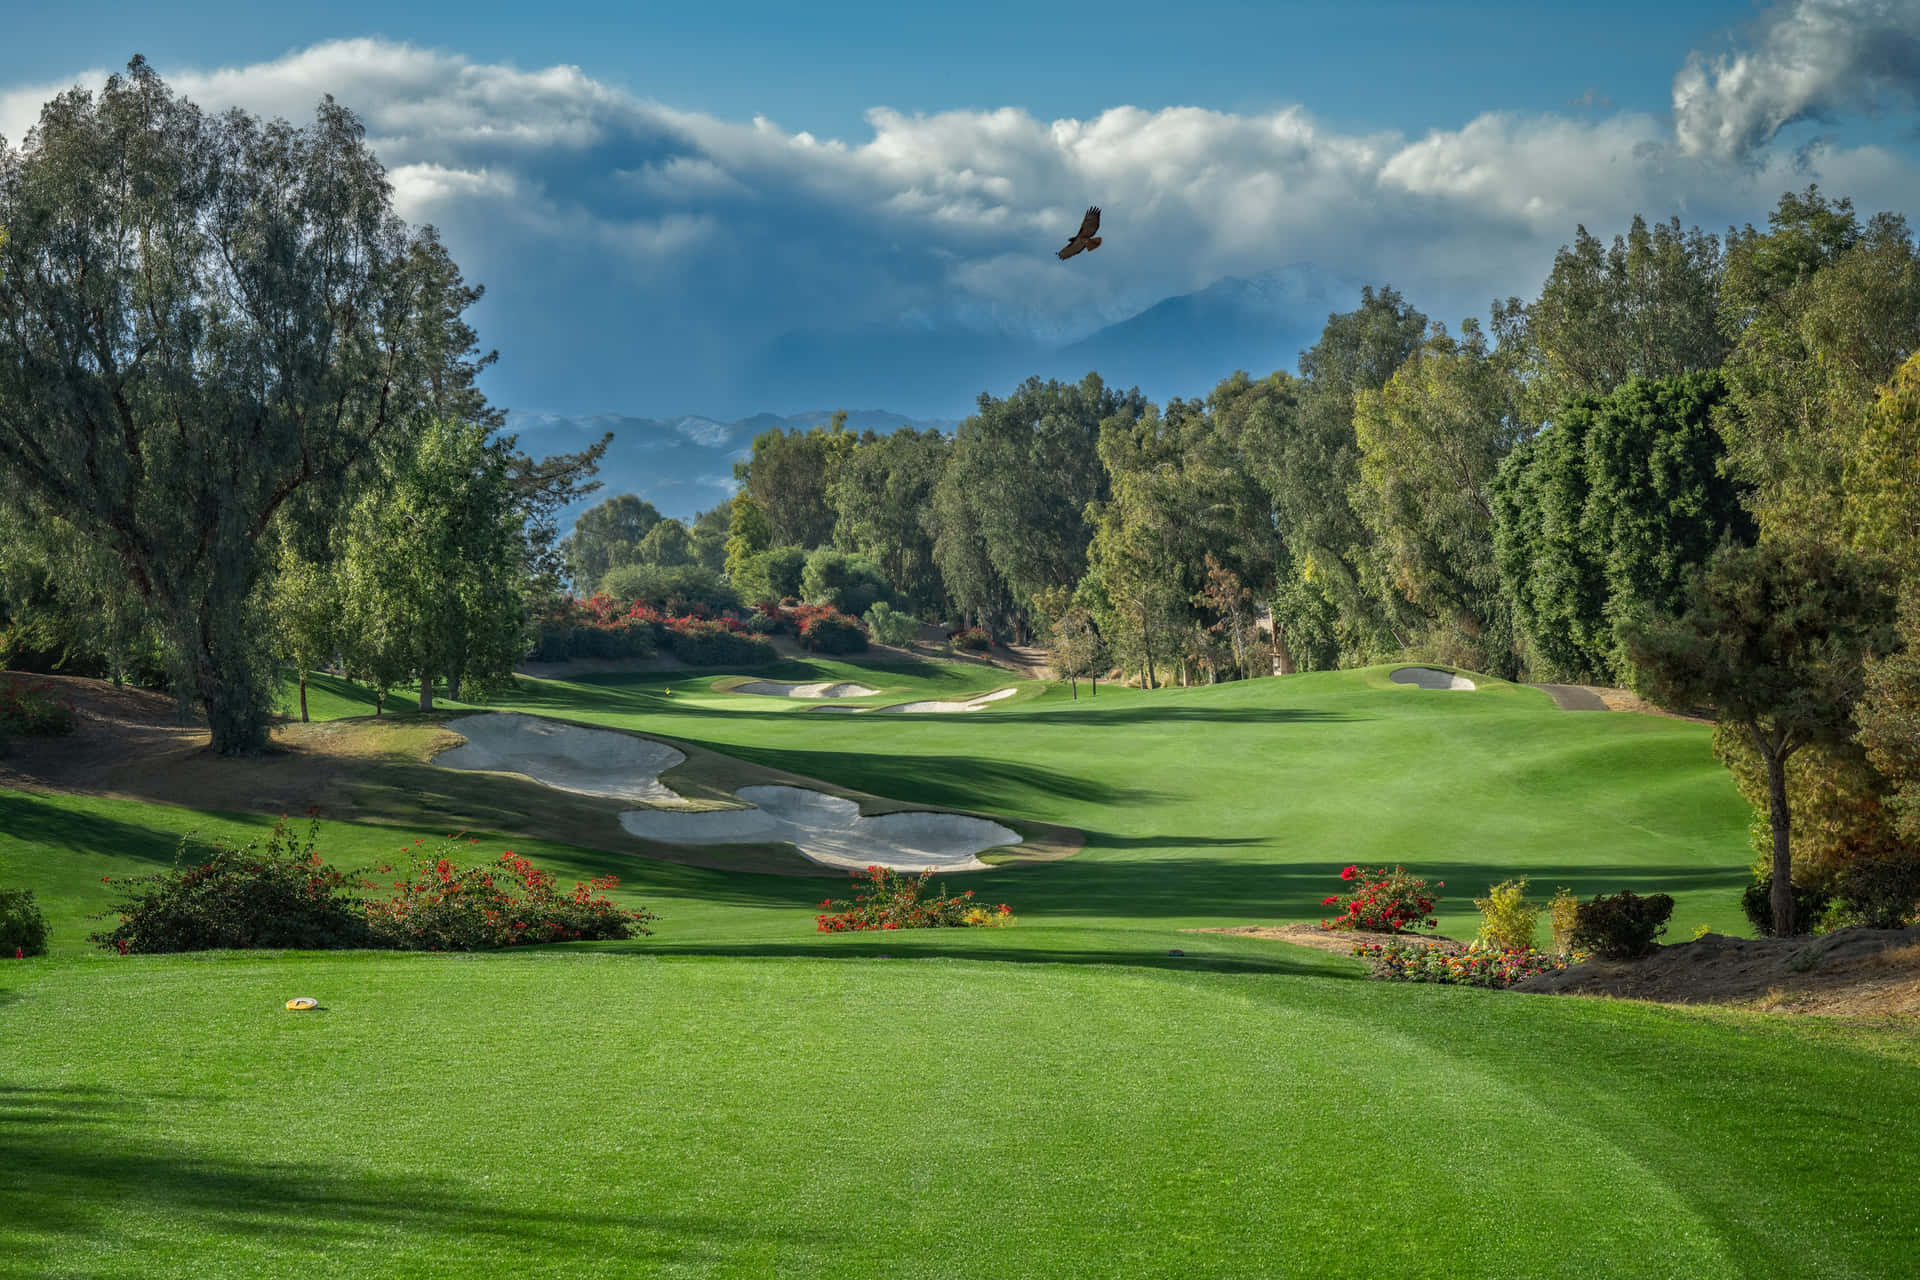 Enjoy a Breathtaking View of this Delightful Golf Course